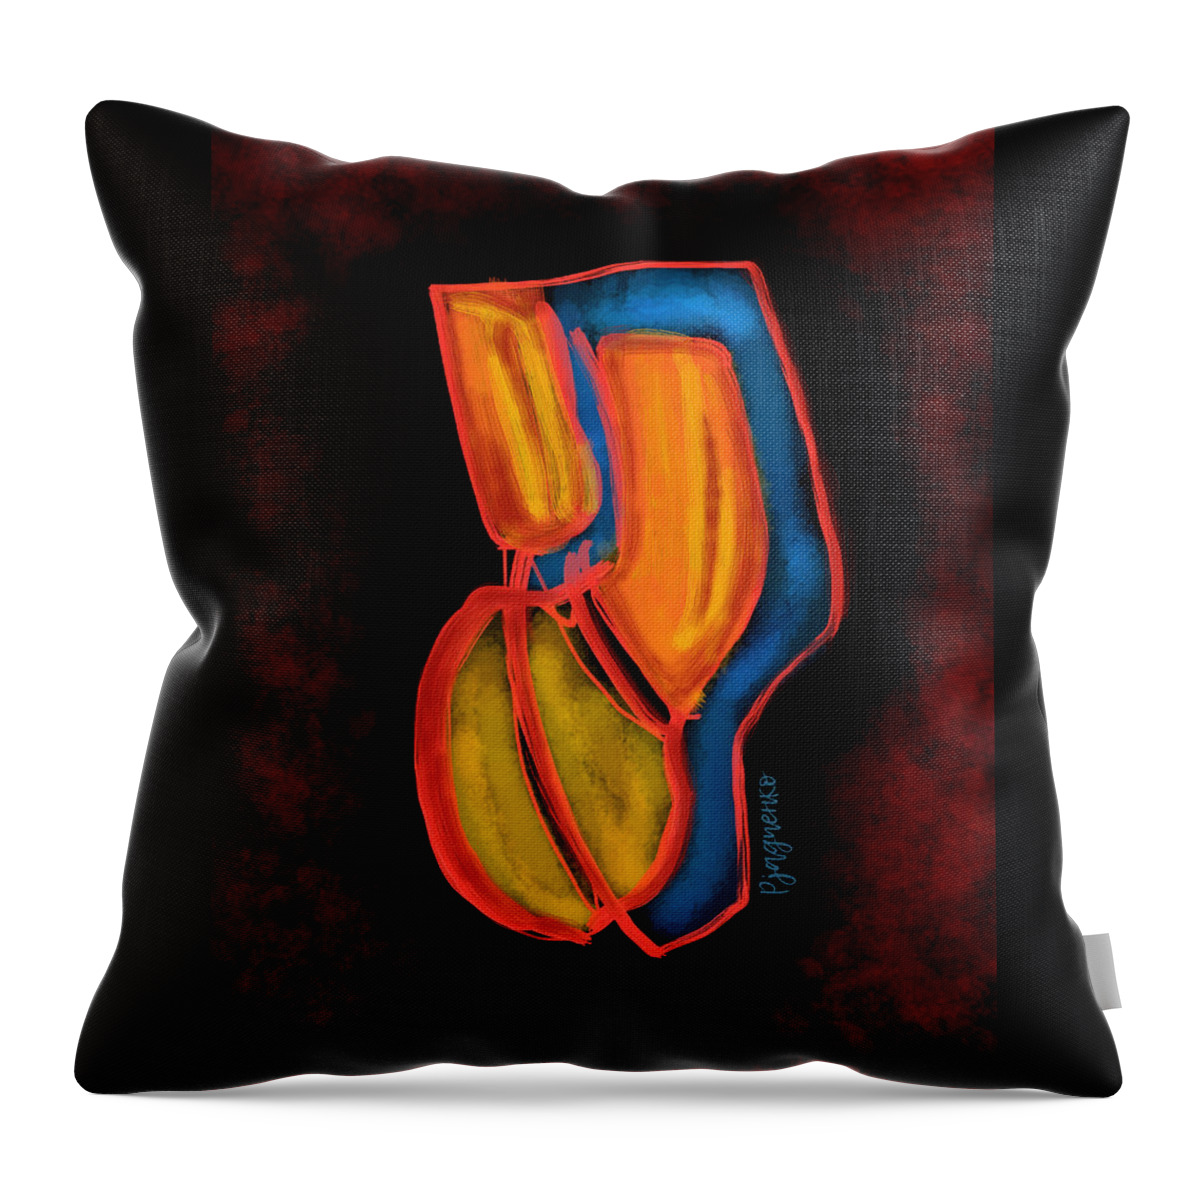 Collage Throw Pillow featuring the digital art Collage #21 by Ljev Rjadcenko